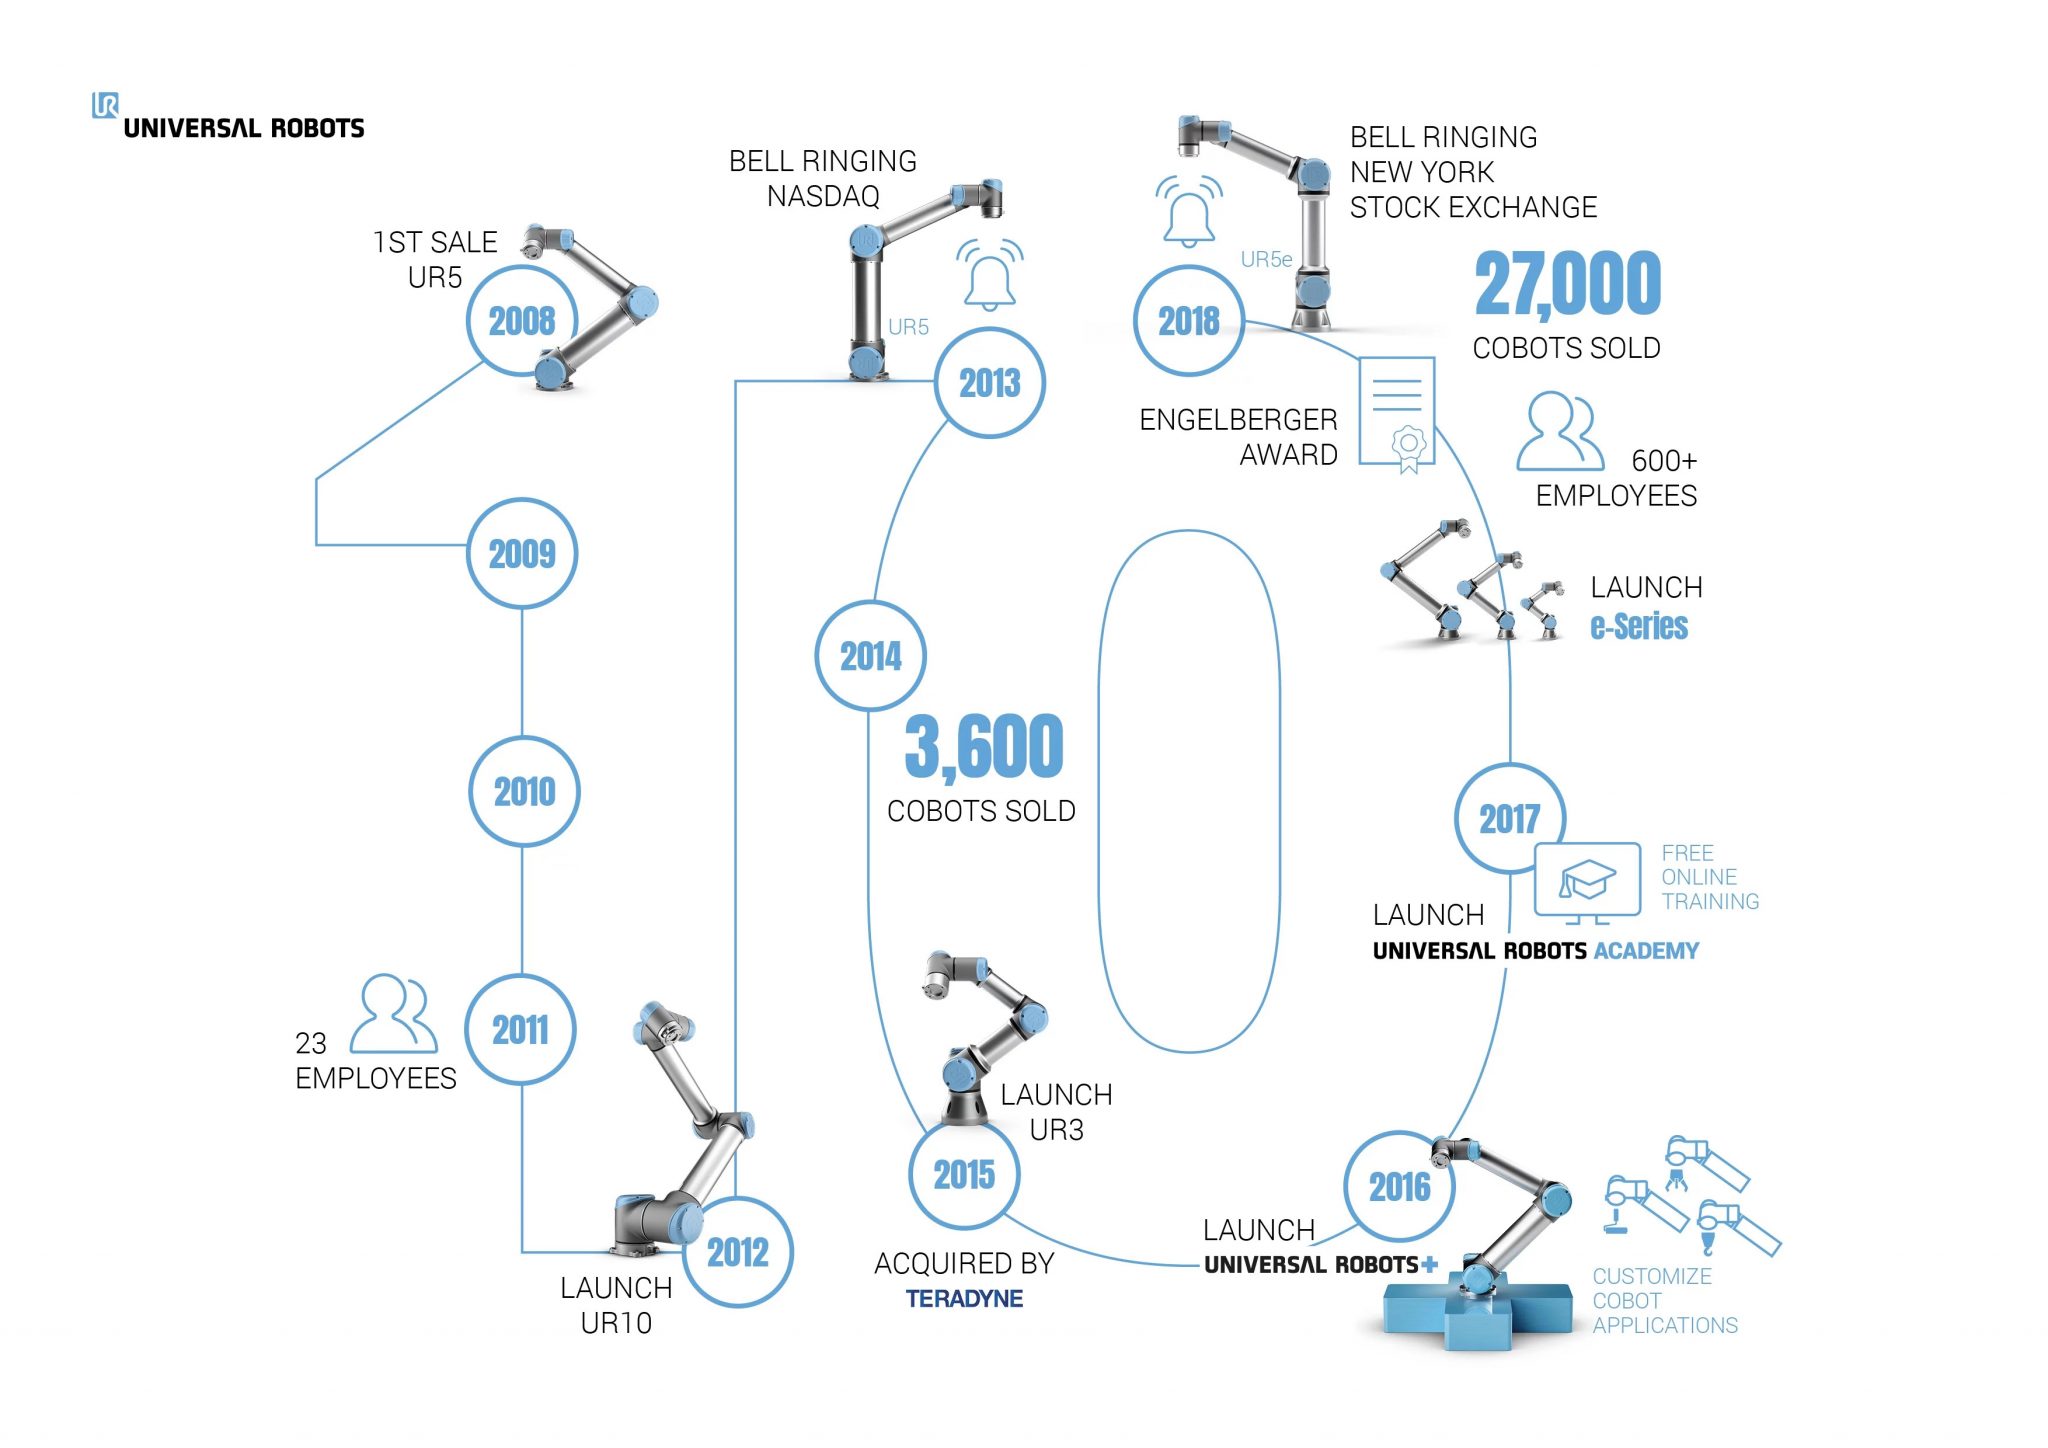 Universal Robots Celebrates 10 Year Anniversary of Selling the World’s First Commercially Viable Collaborative Robot